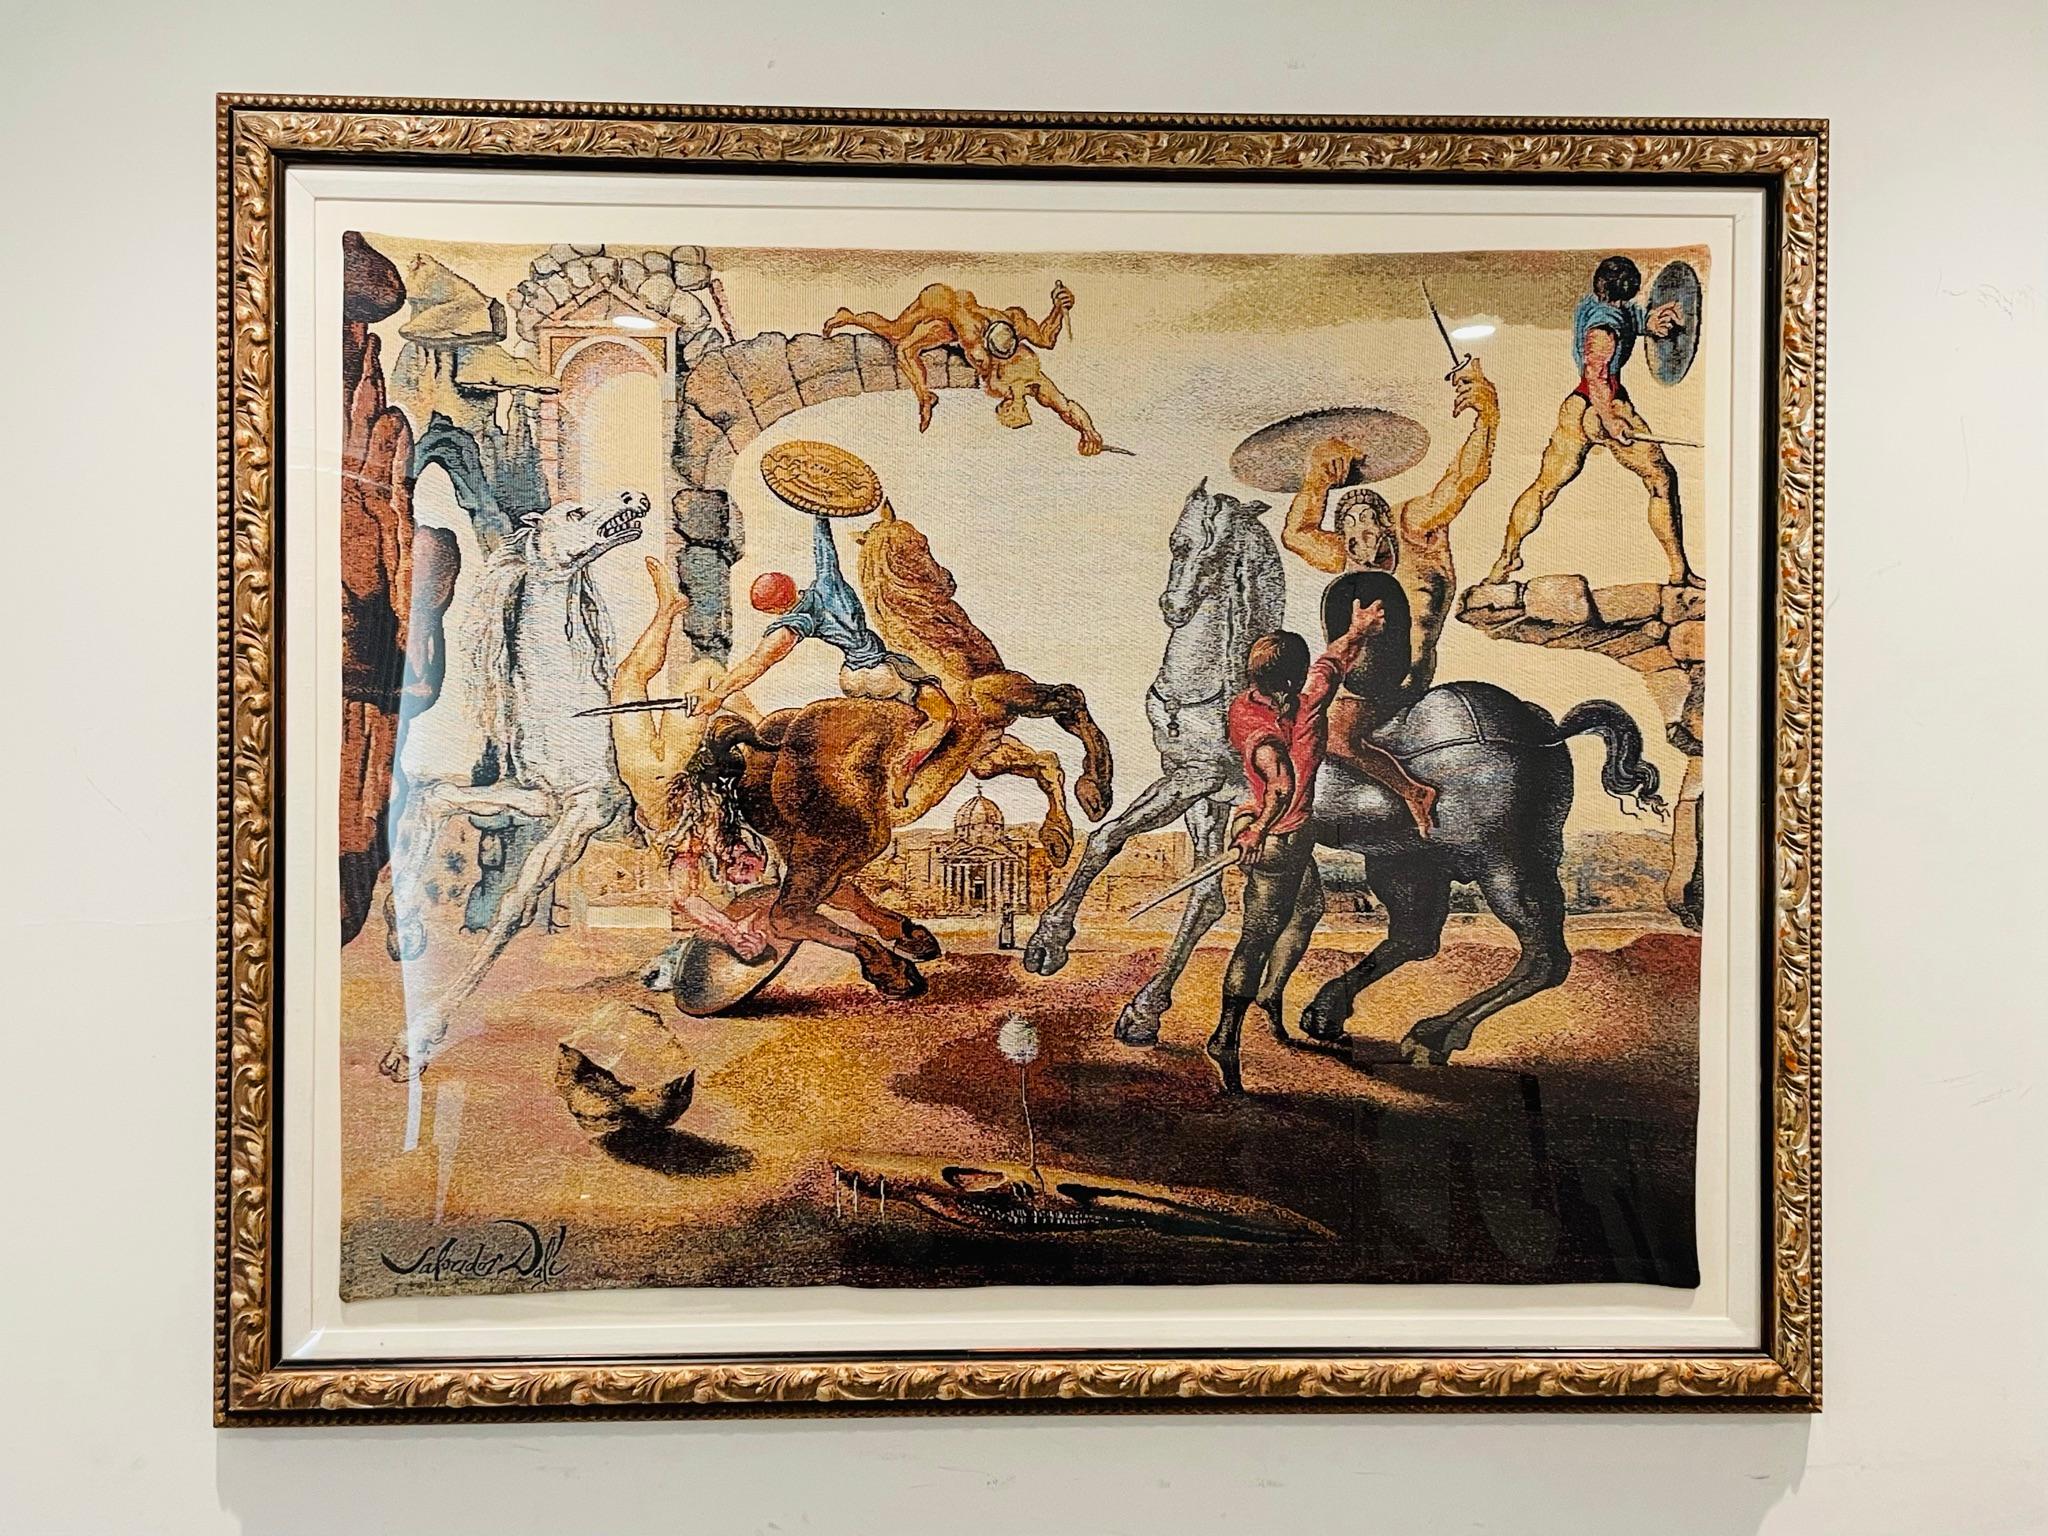 Extremely rare and original jacquard woven tapestry by Salvador Dali titled, 